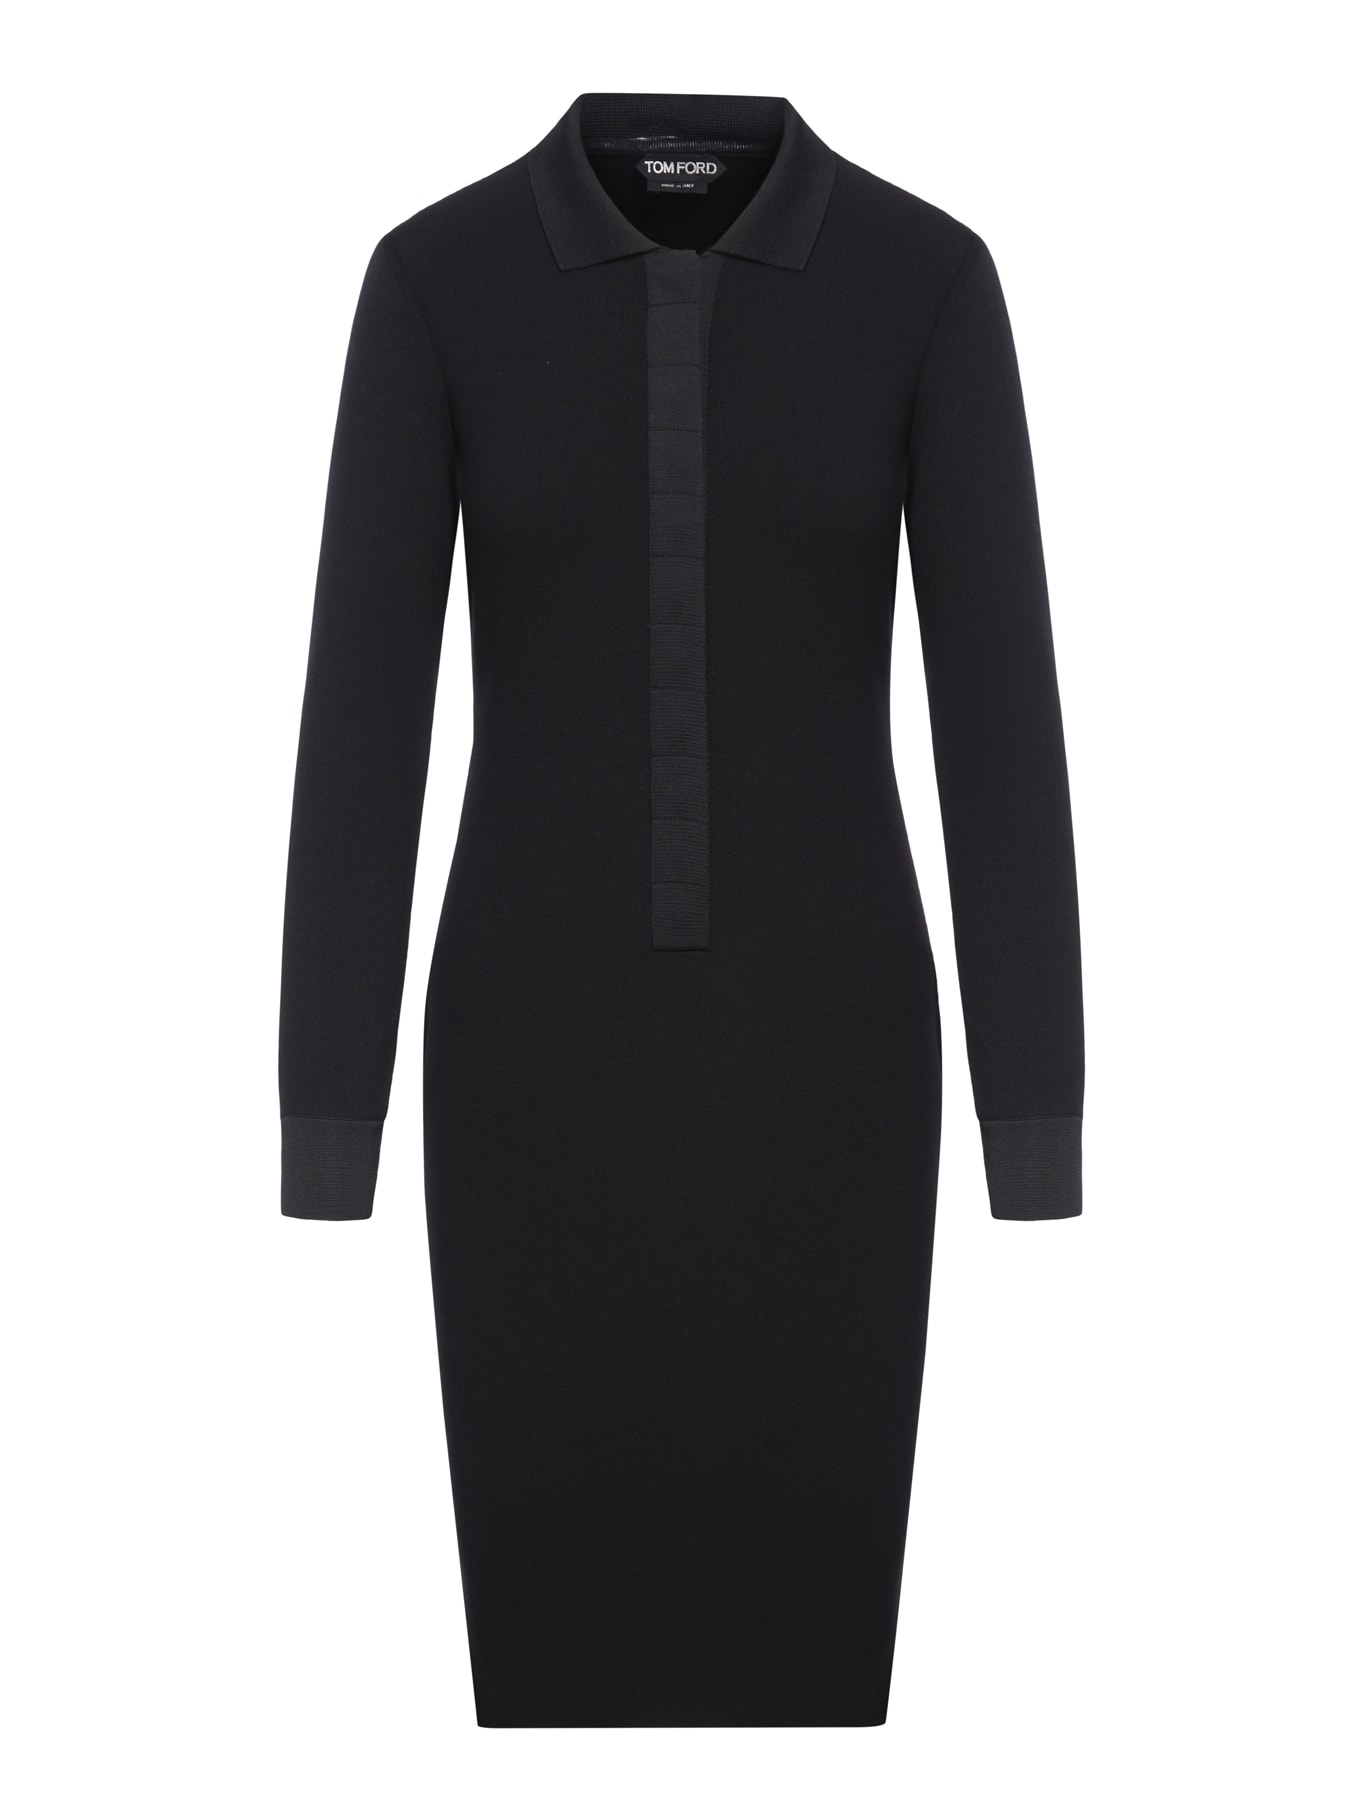 TOM FORD FULL NEEDLE STRETCH WOOL - 14GG POLO DRESS